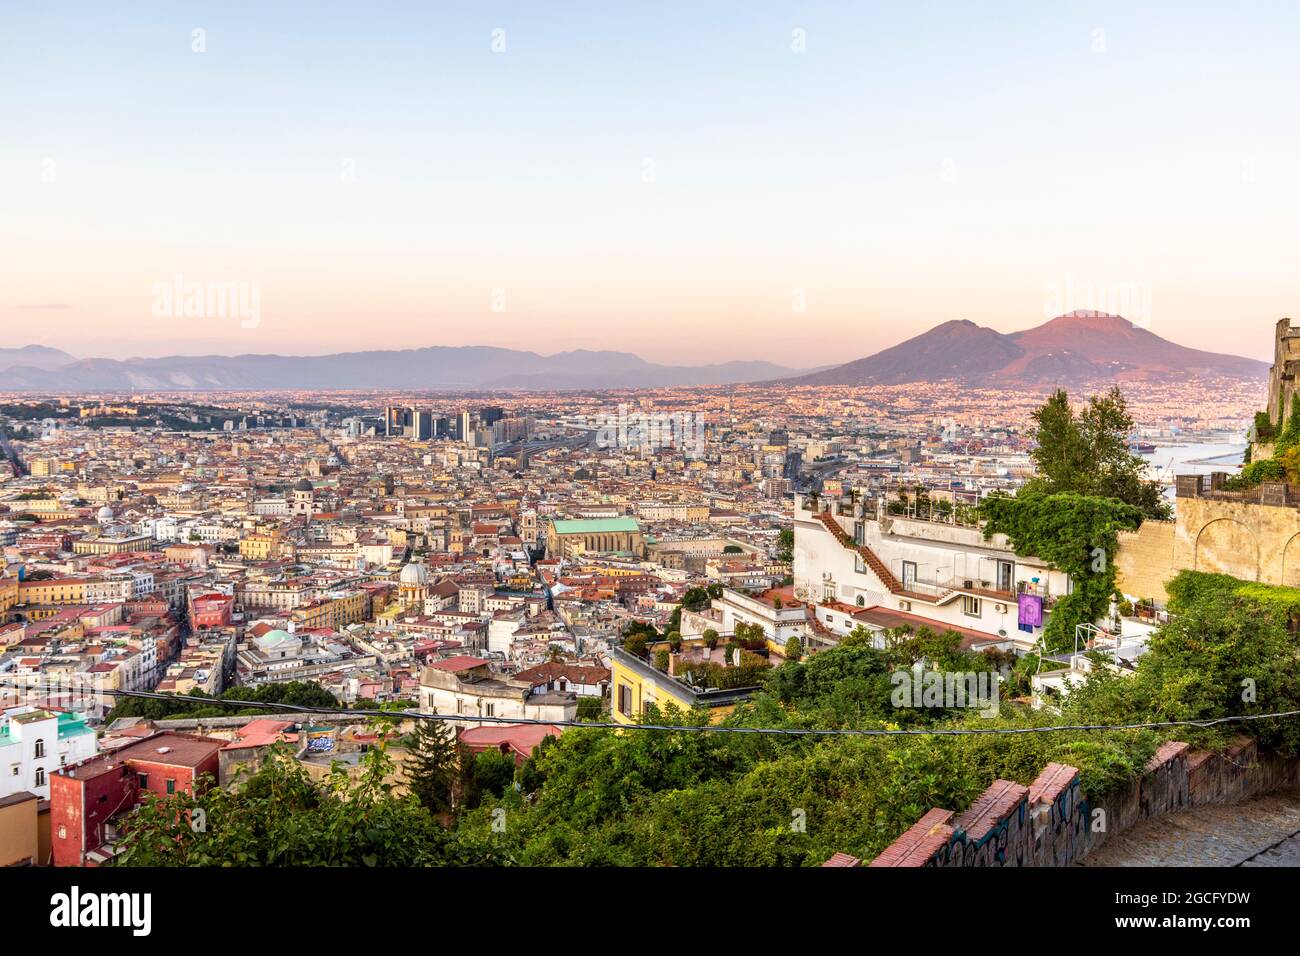 Napoli, Italy - July 11, 2021: Bay of Napoli and Vesuvius volcano in background at sunset in a summer day in Italy, Campania Stock Photo